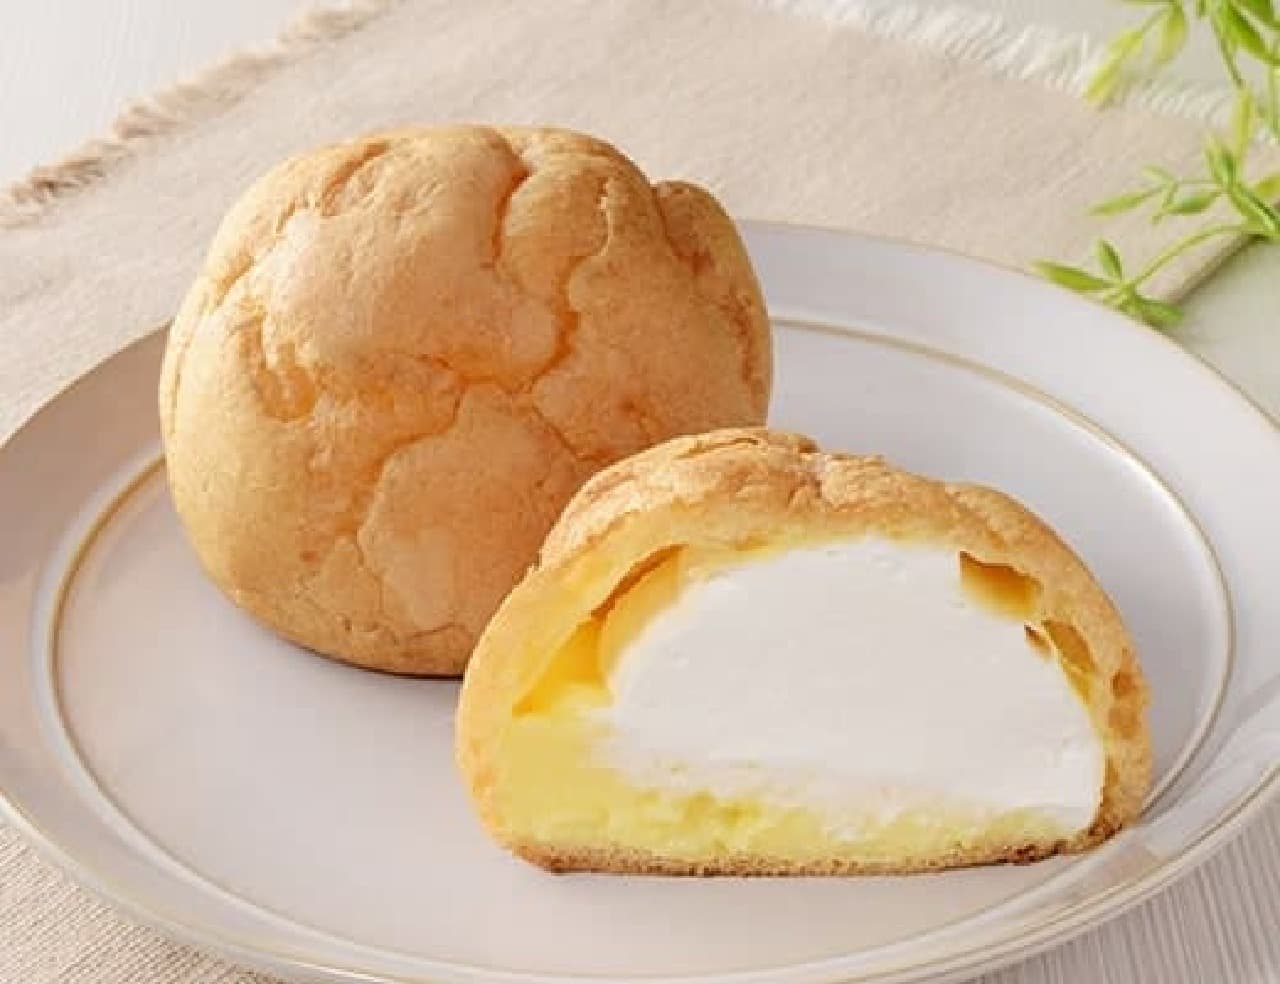 LAWSON "Large twin puffs filled with cream